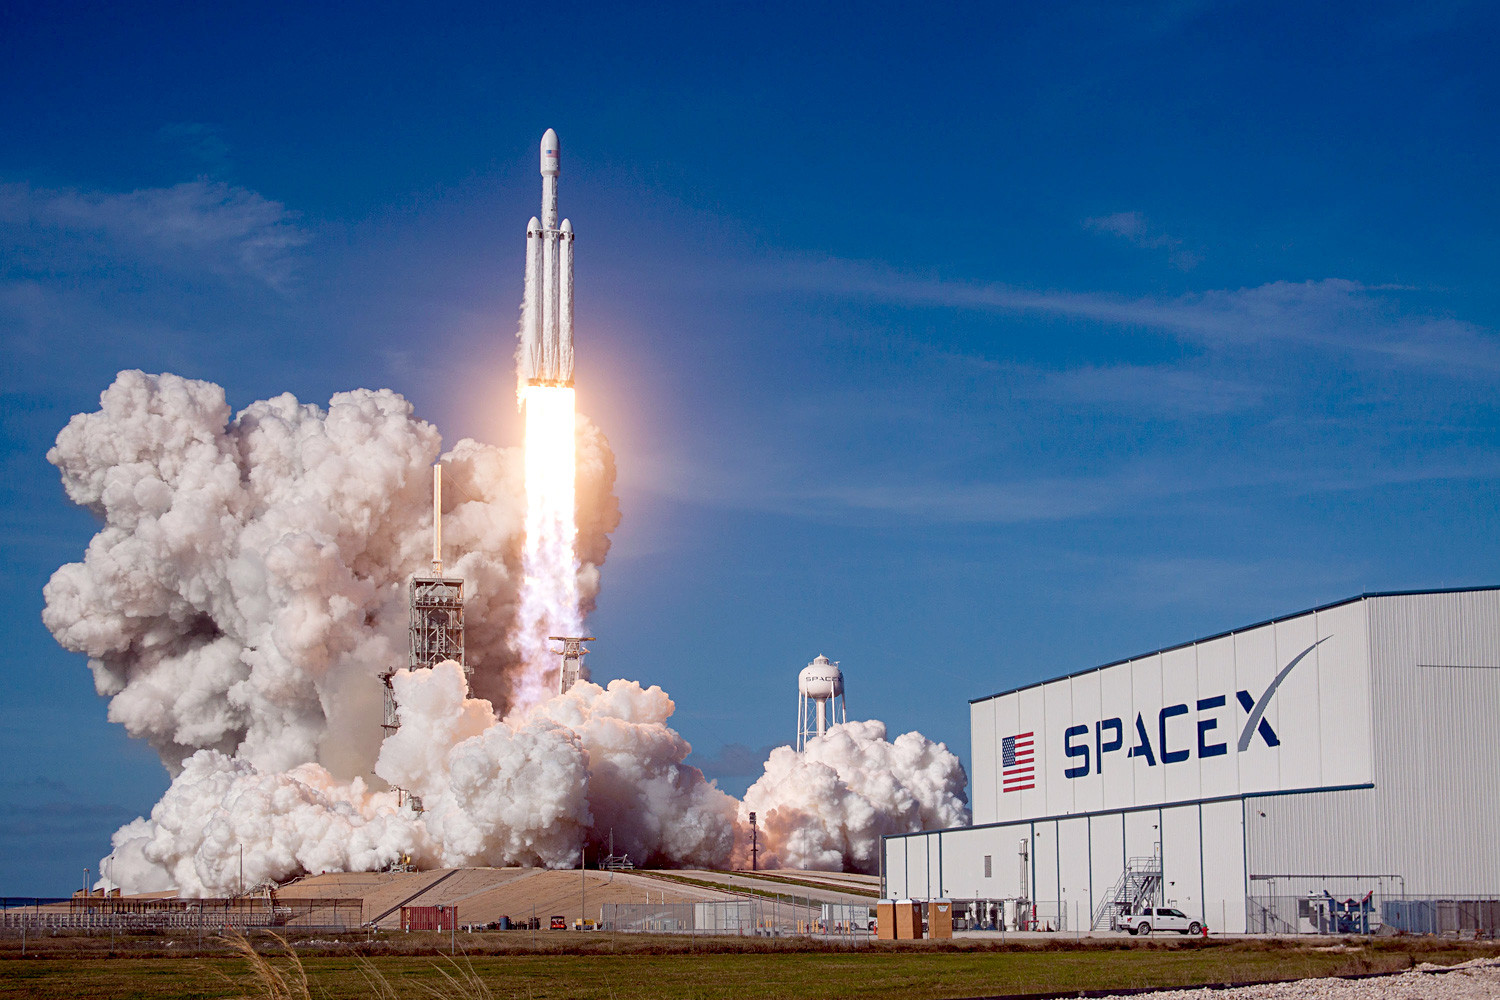 The SpaceX Falcon Heavy rocket lifts off carrying a demonstration payload into space on February 6, 2018 in Cape Canaveral, Florida.